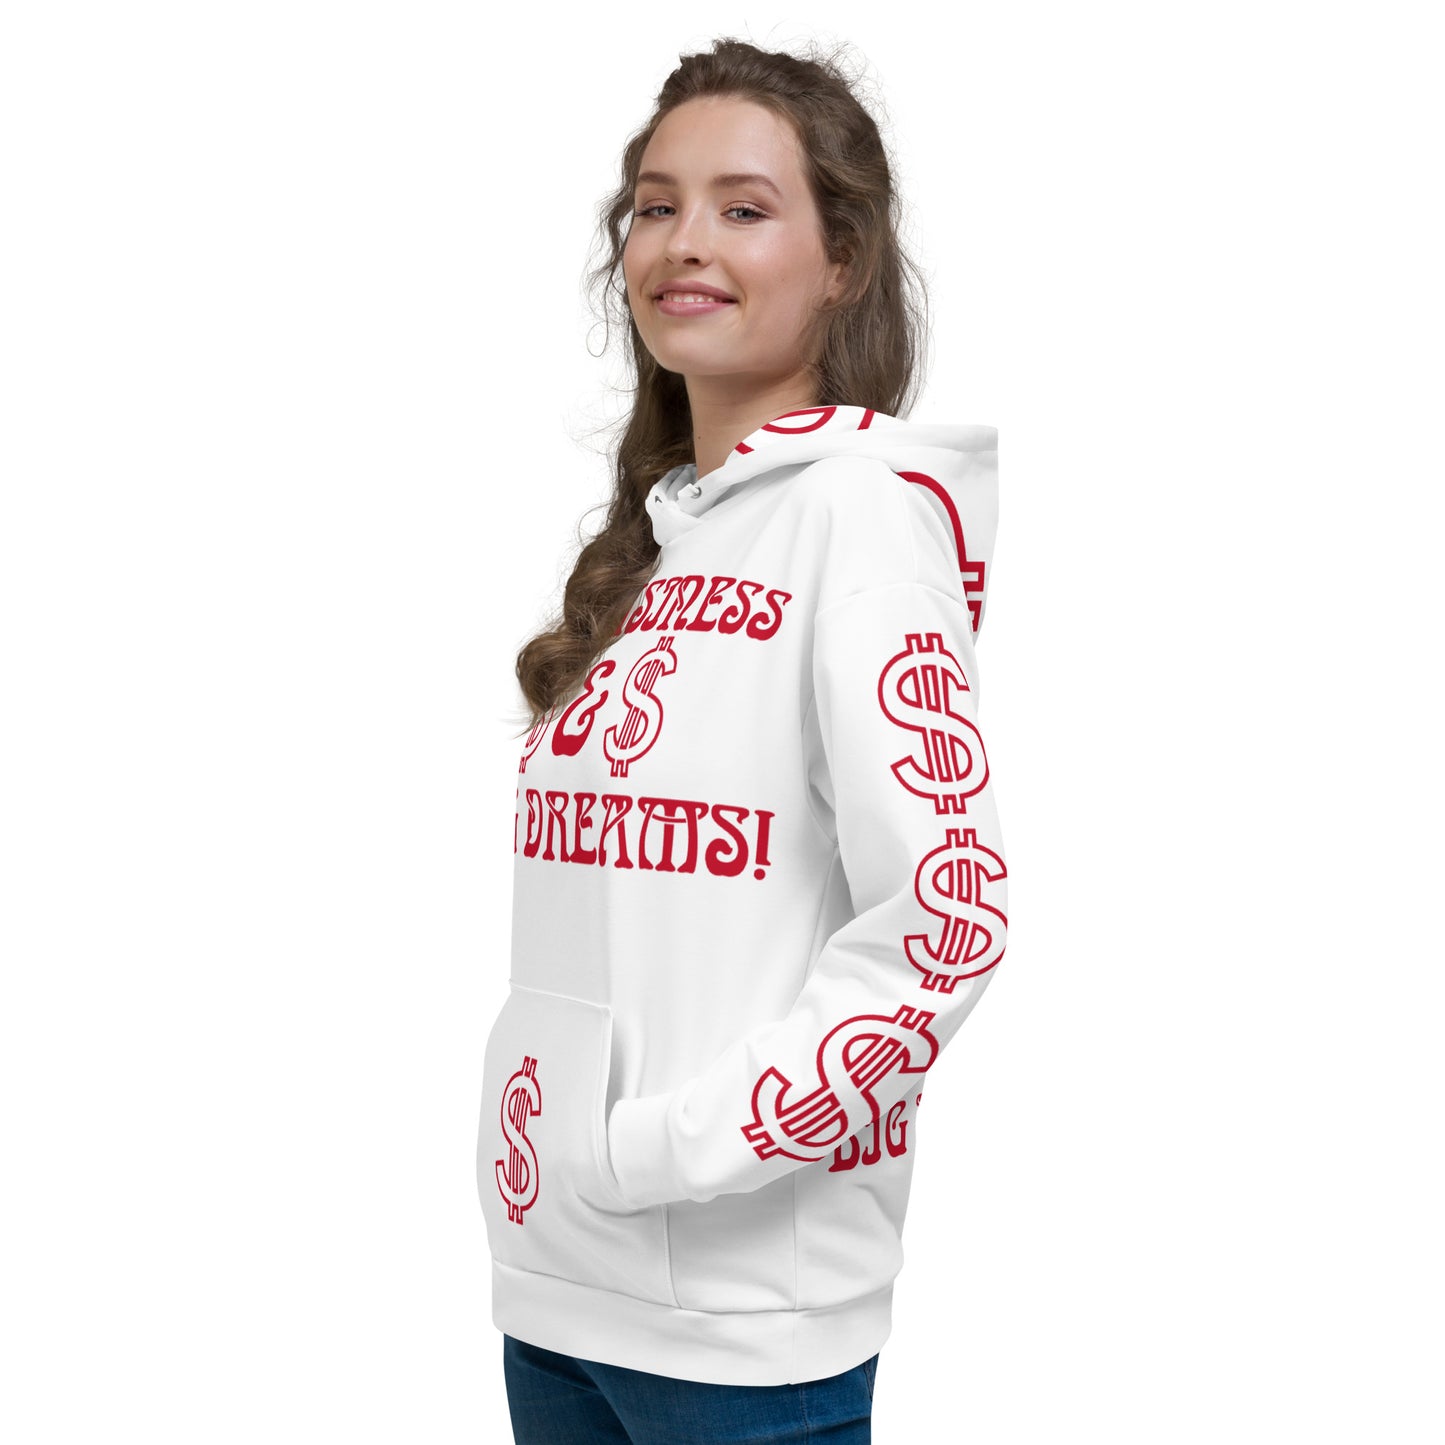 “BIG BUSINESS & BIG DREAMS!”White Unisex Hoodie W/Red Font